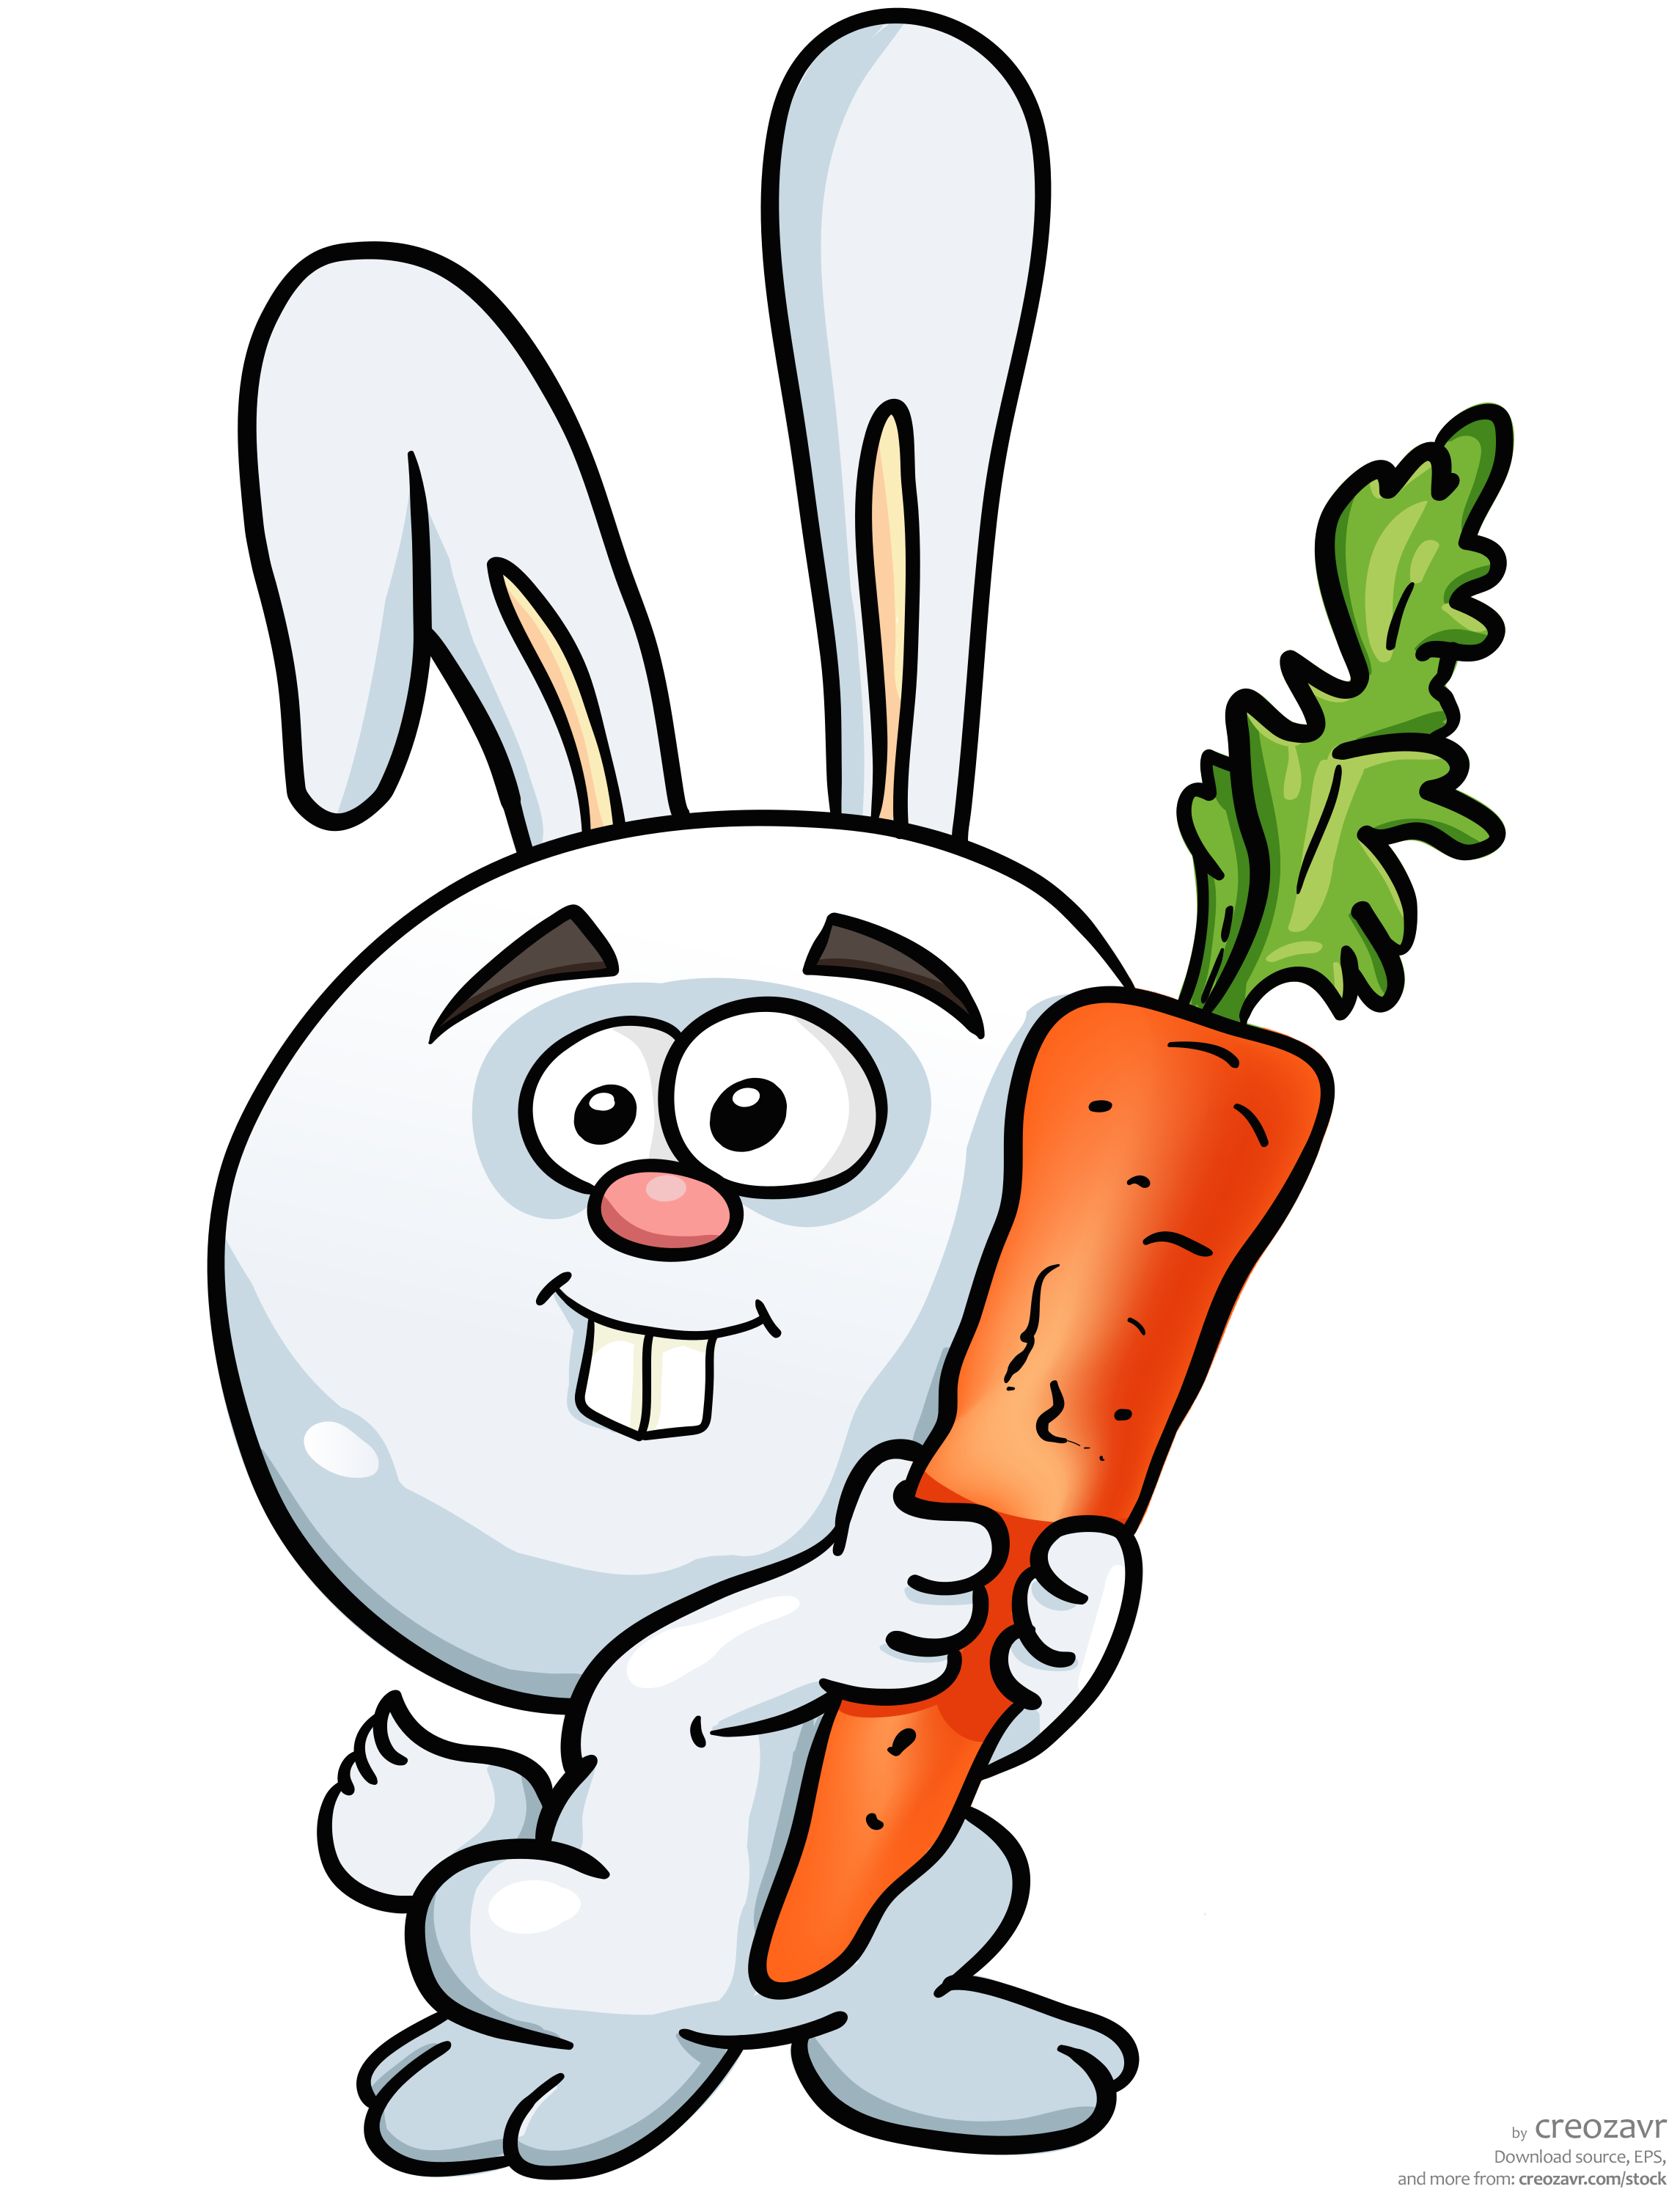 Cute animated rabbit with a carrot